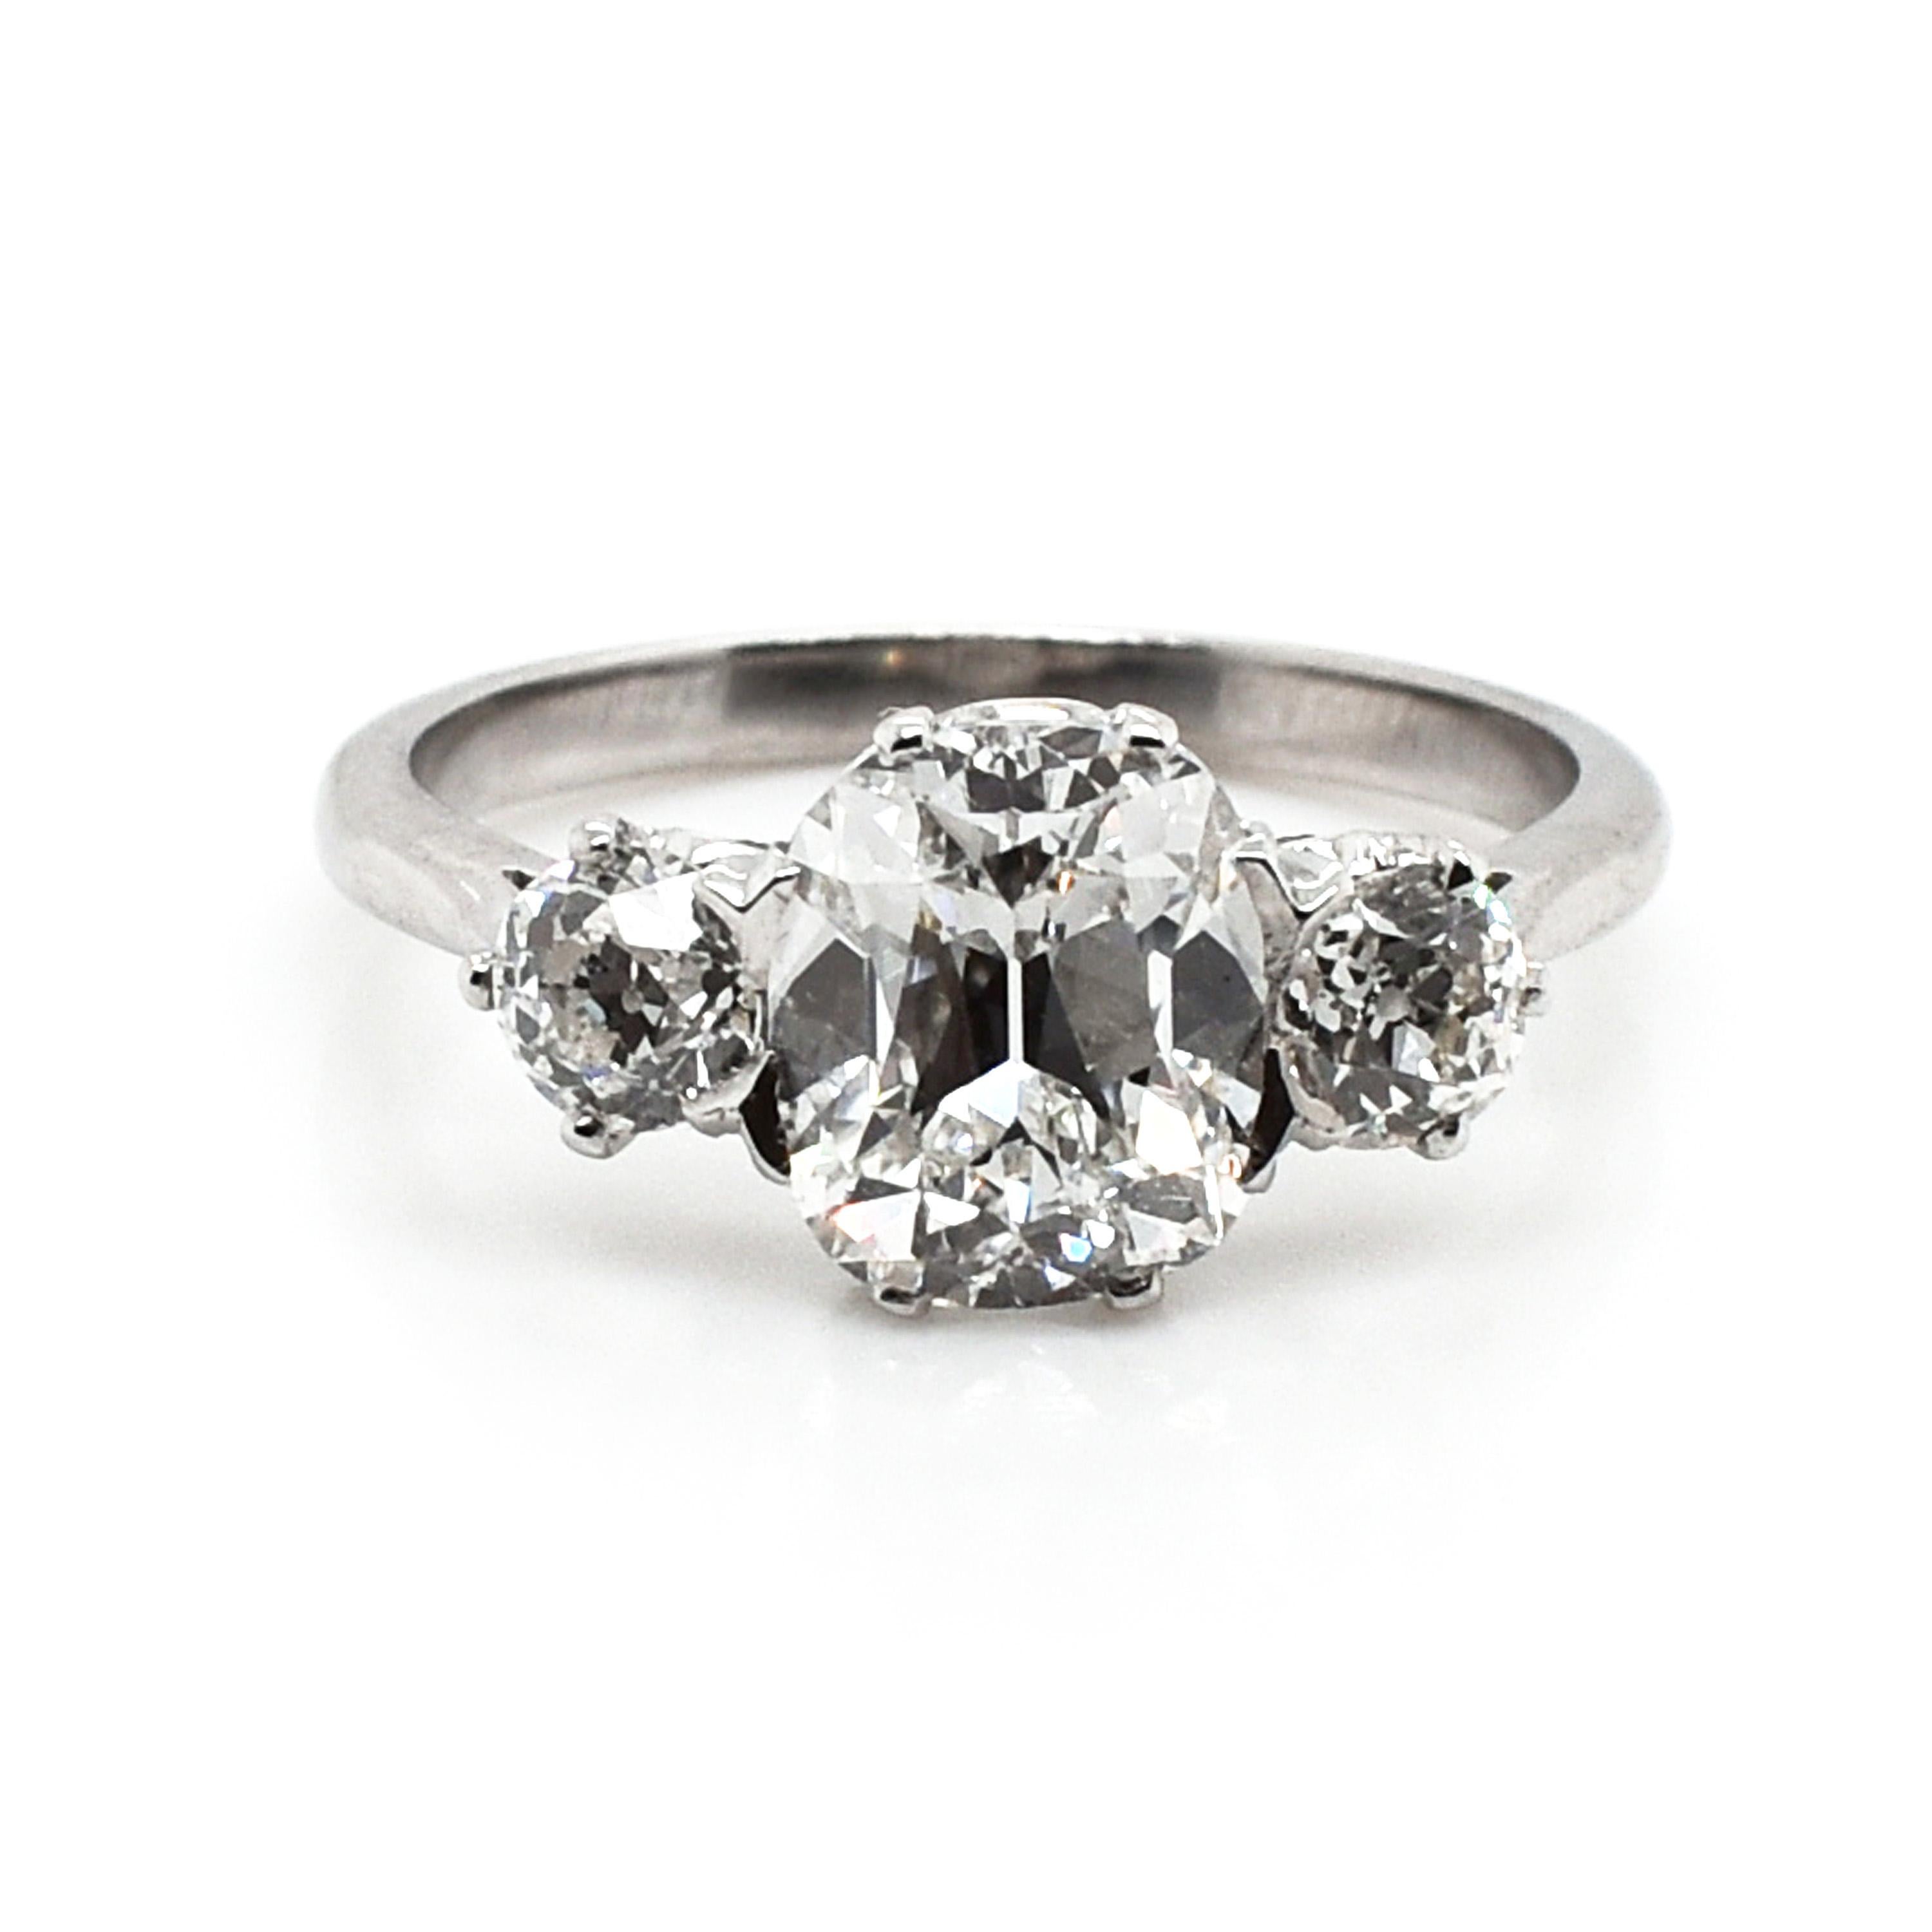 A three stone diamond ring set with a 2.01ct, E colour, VS1 clarity, cushion-cut diamond, with two old-cut diamonds set either side, with a total weight of 0.55ct, in claw settings, mounted in platinum, with tapered shoulders and a fine, pierced